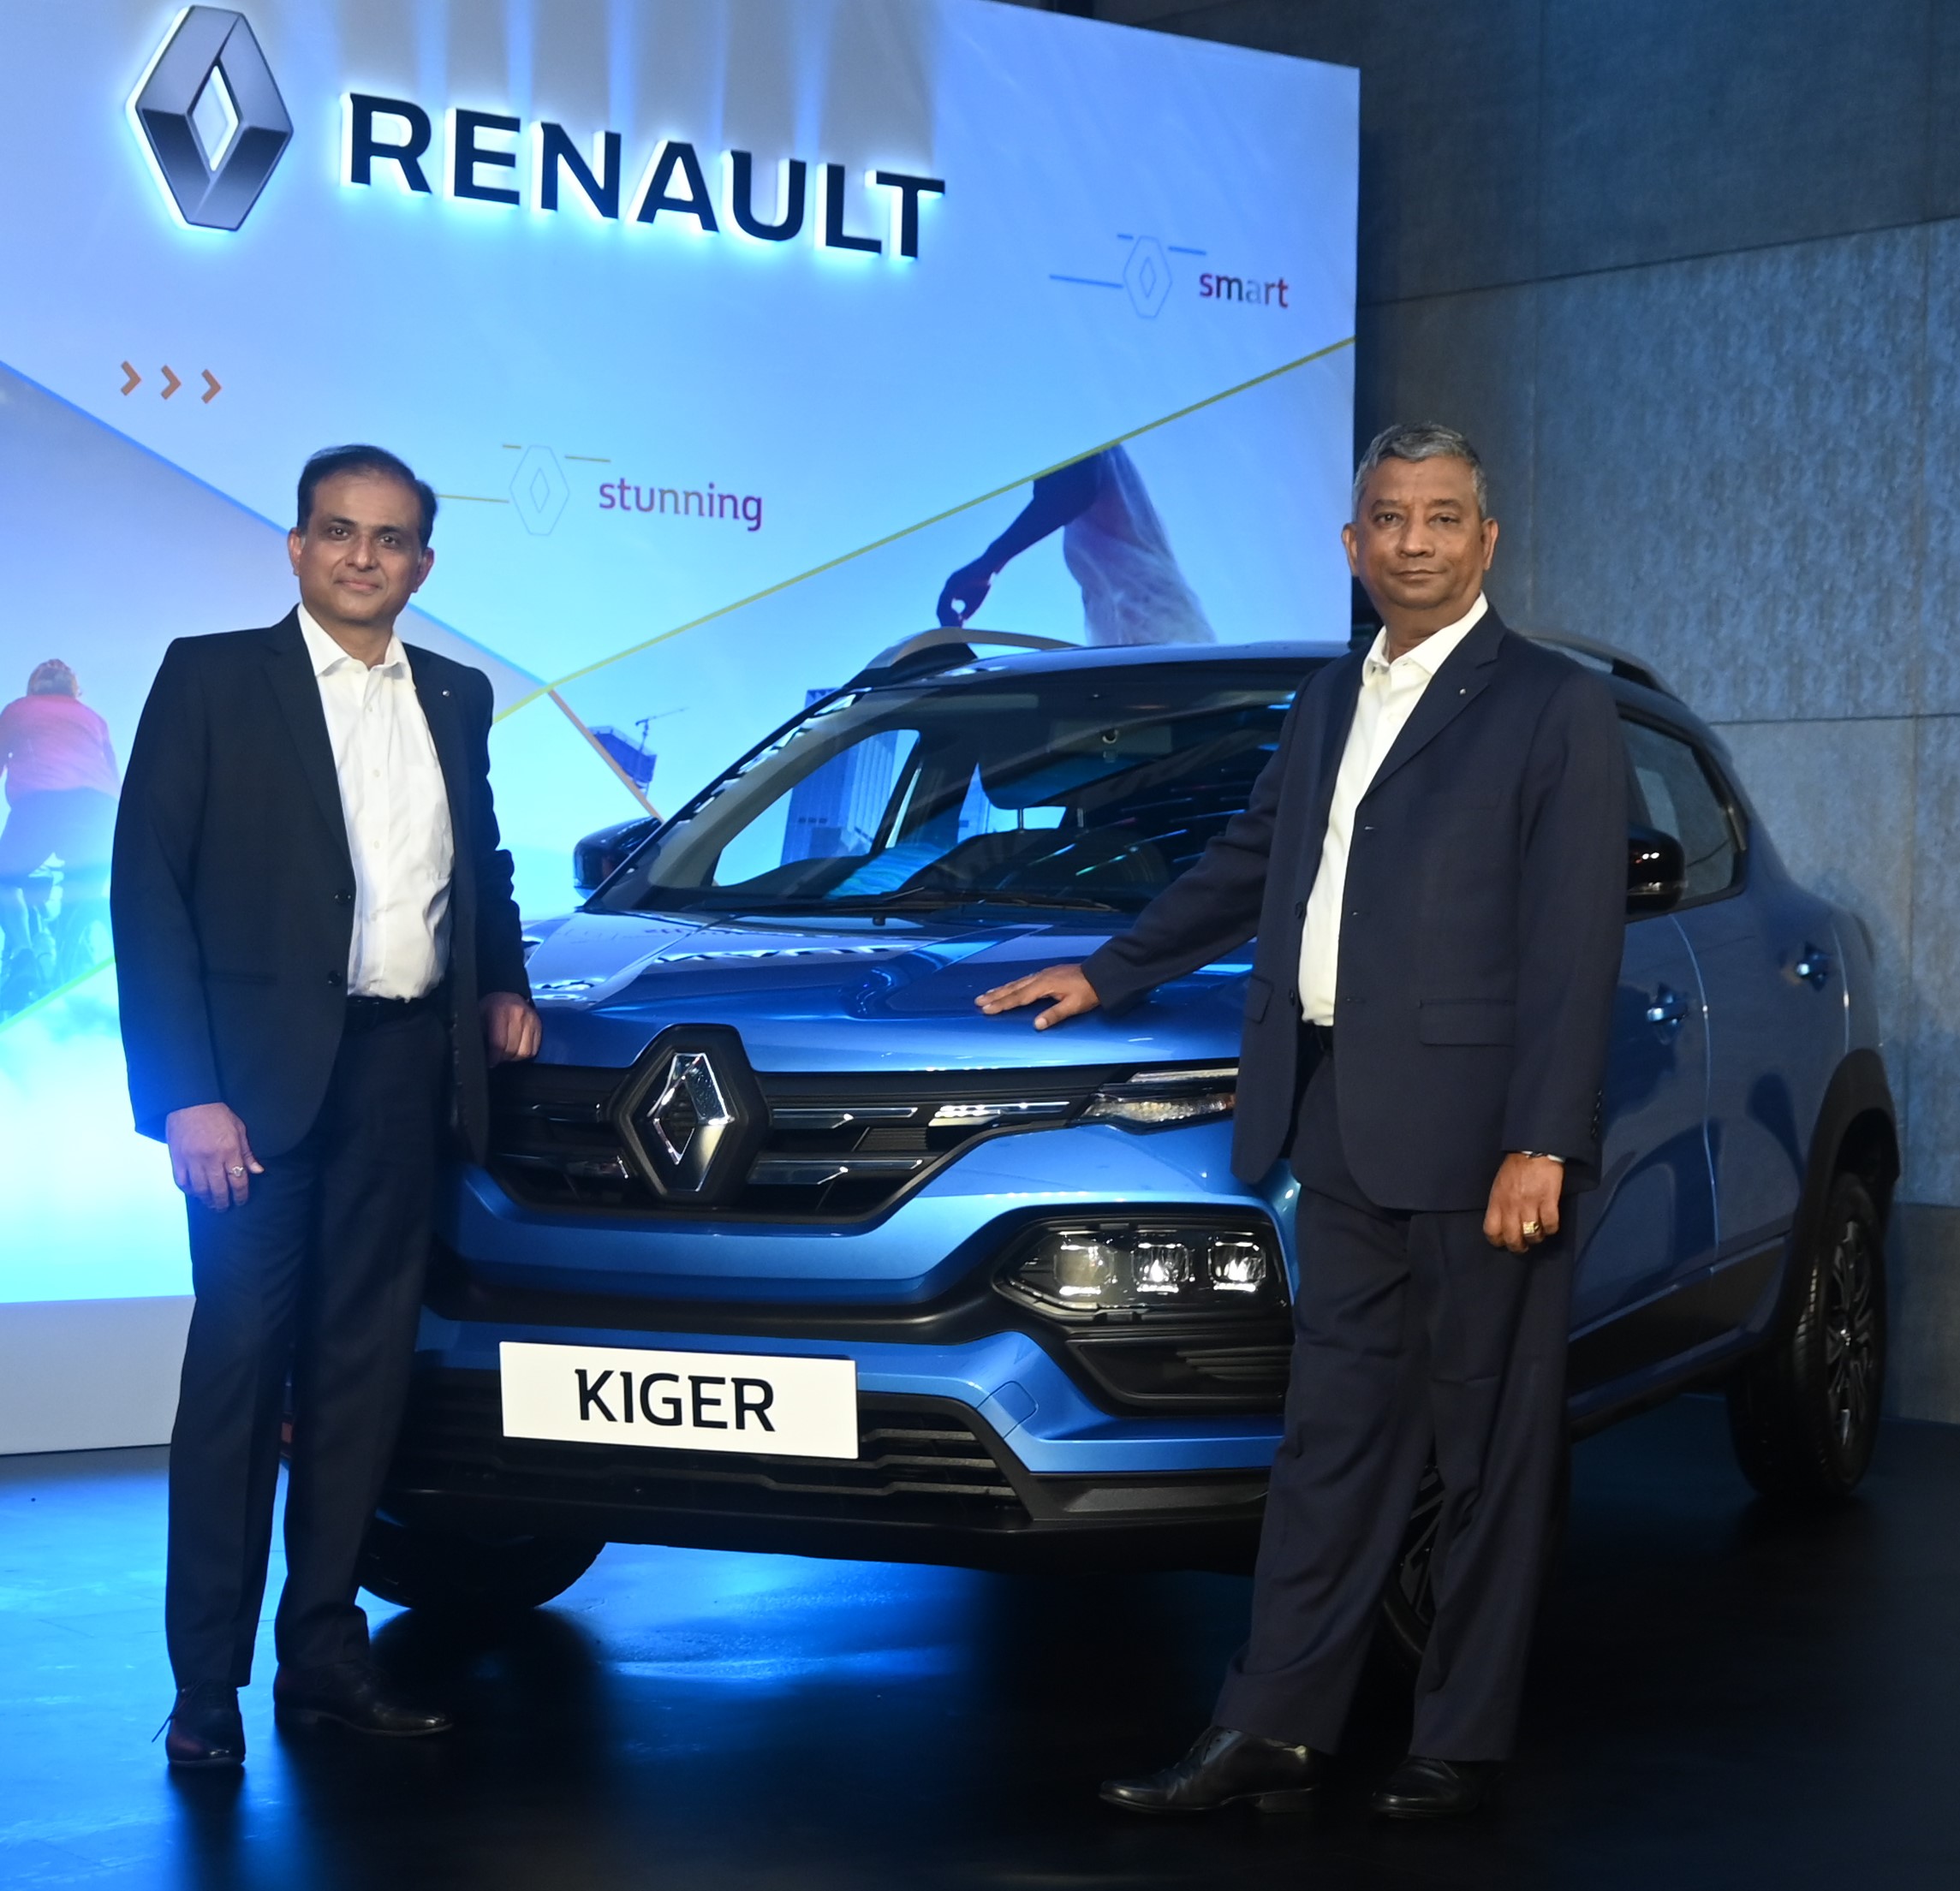 THE ALL NEW RENAULT KIGER STARTS AT INR 5.45 LAKHS decoding=